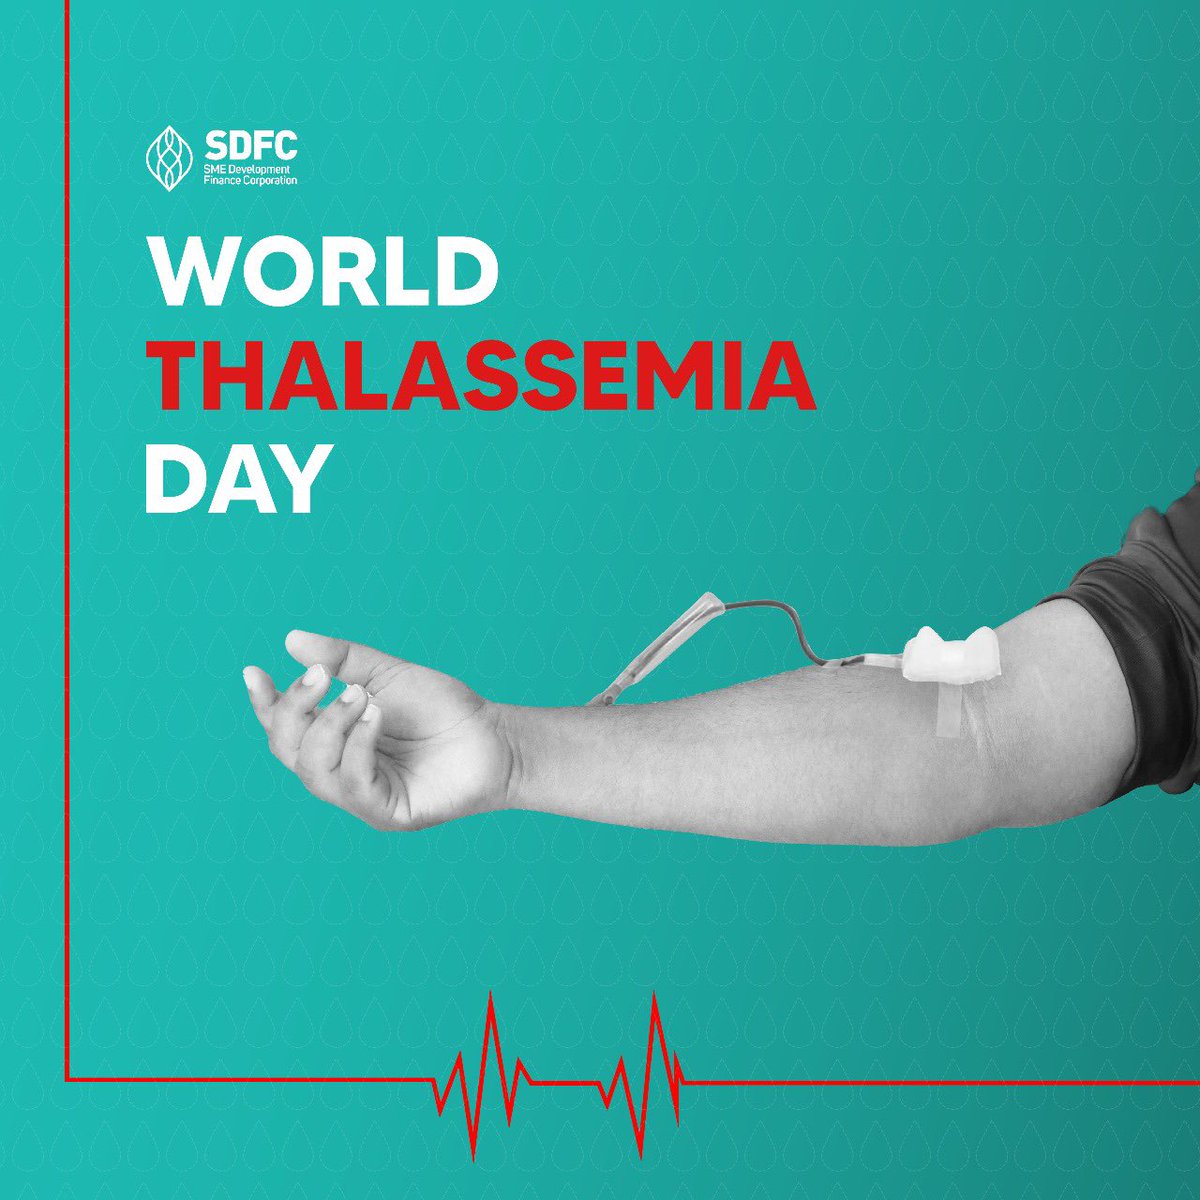 Join us in raising awareness for Thalassemia Day and supporting those affected by this genetic blood disorder. Let's come together to educate others and promote understanding and acceptance for individuals living with Thalassemia. #ThalassemiaDay #Awareness #Support